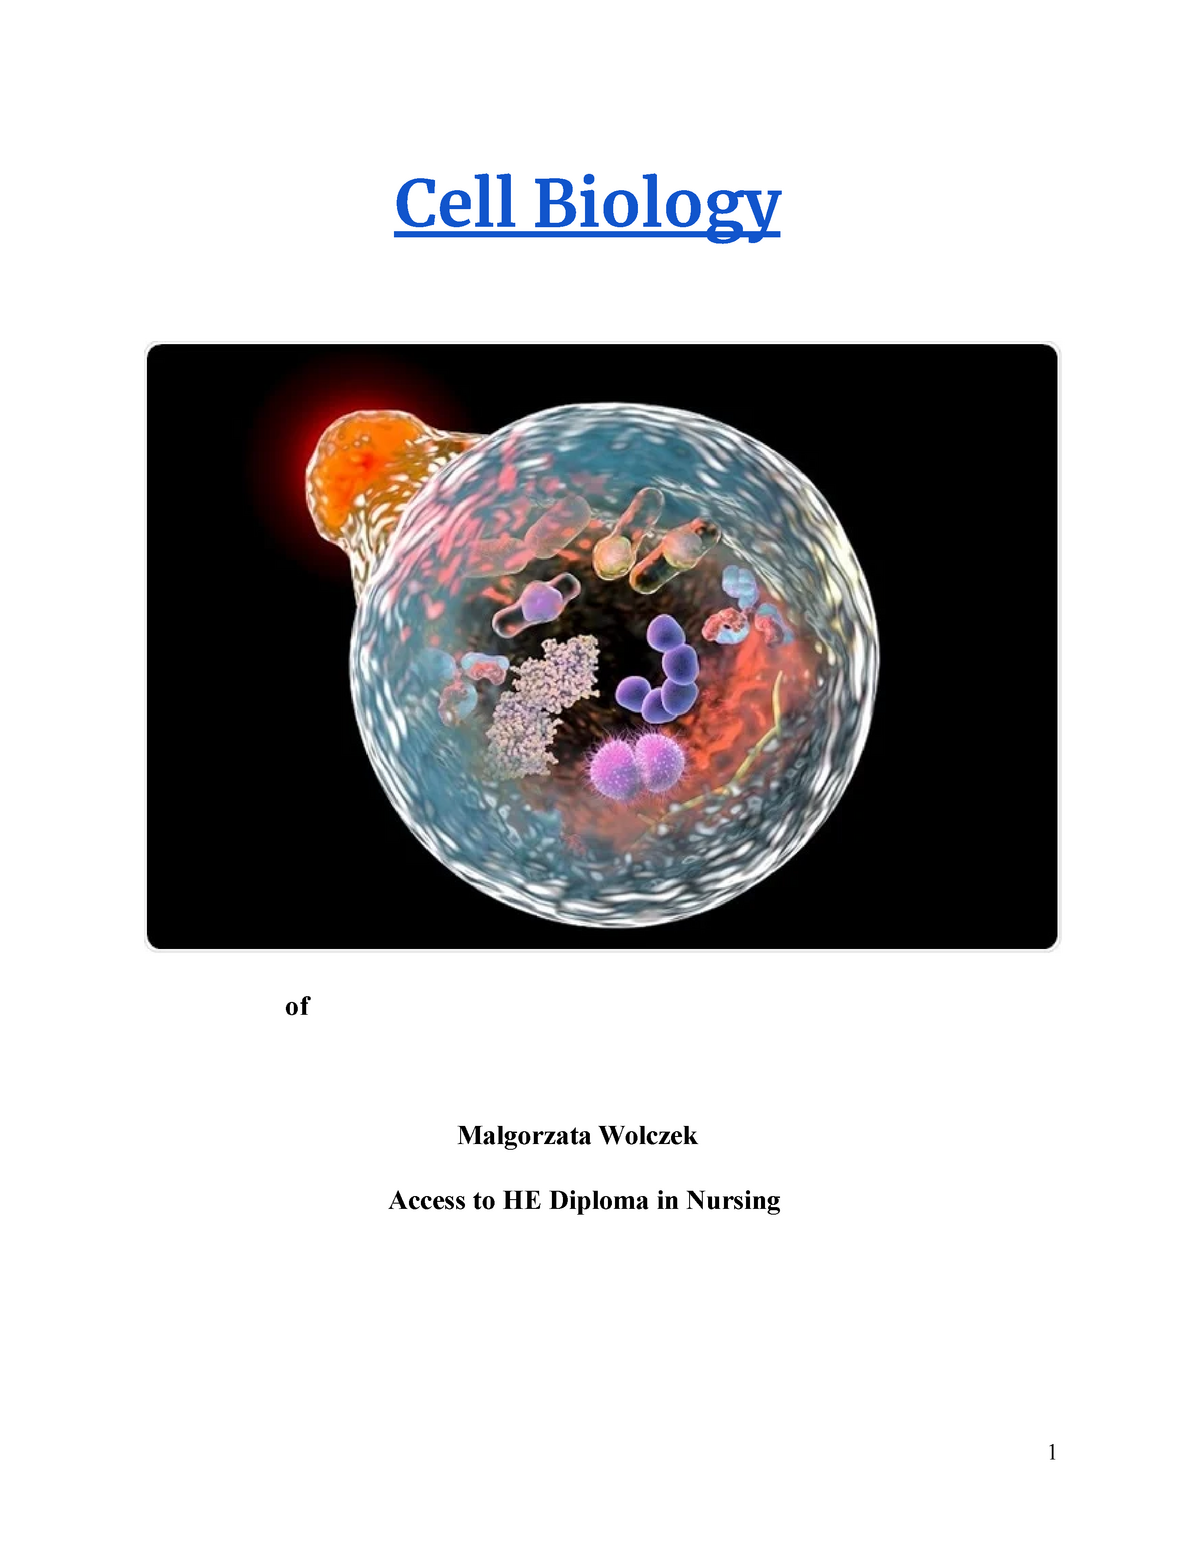 research topics on cell biology